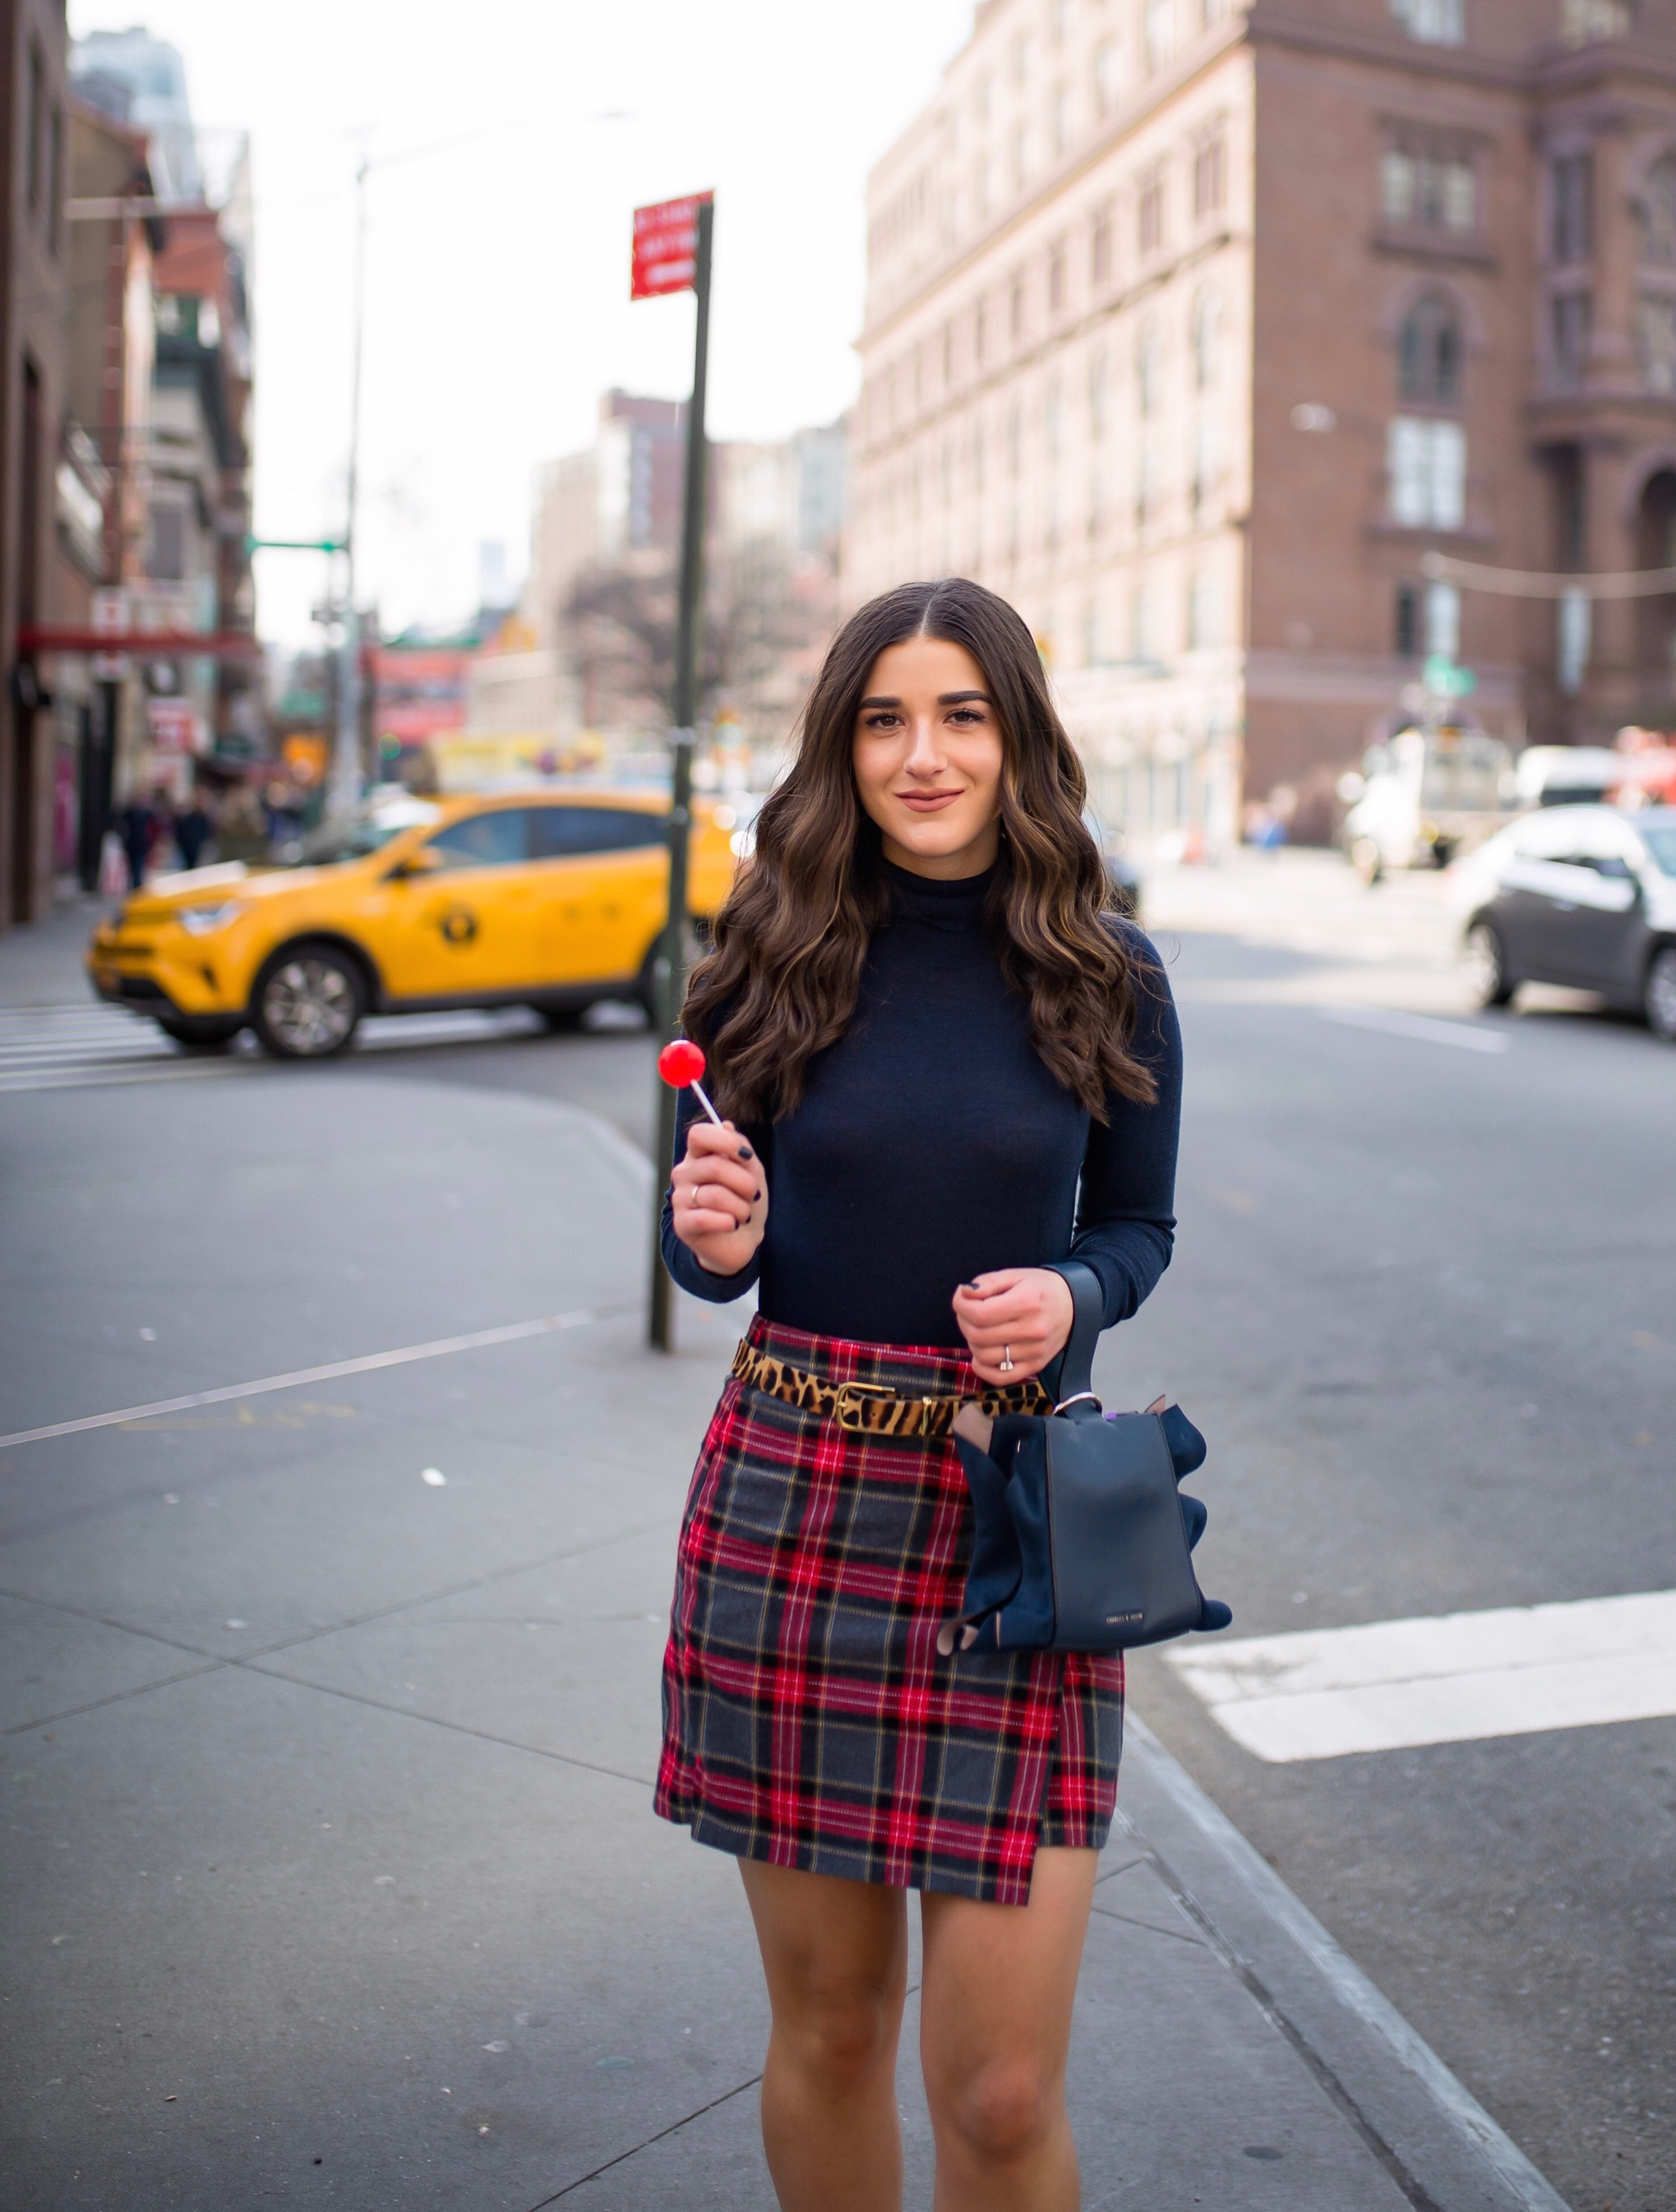 How NYFW Changed From My 1st To 12th Season Plaid Skirt Red Heels Esther Santer Fashion Blog NYC Street Style Blogger Outfit OOTD Trendy Shopping Navy Turtleneck Hair Goals Wear Winter Fall Shop Jcrew  H&M Banana Republic Leopard Belt Accessories Bag.jpg